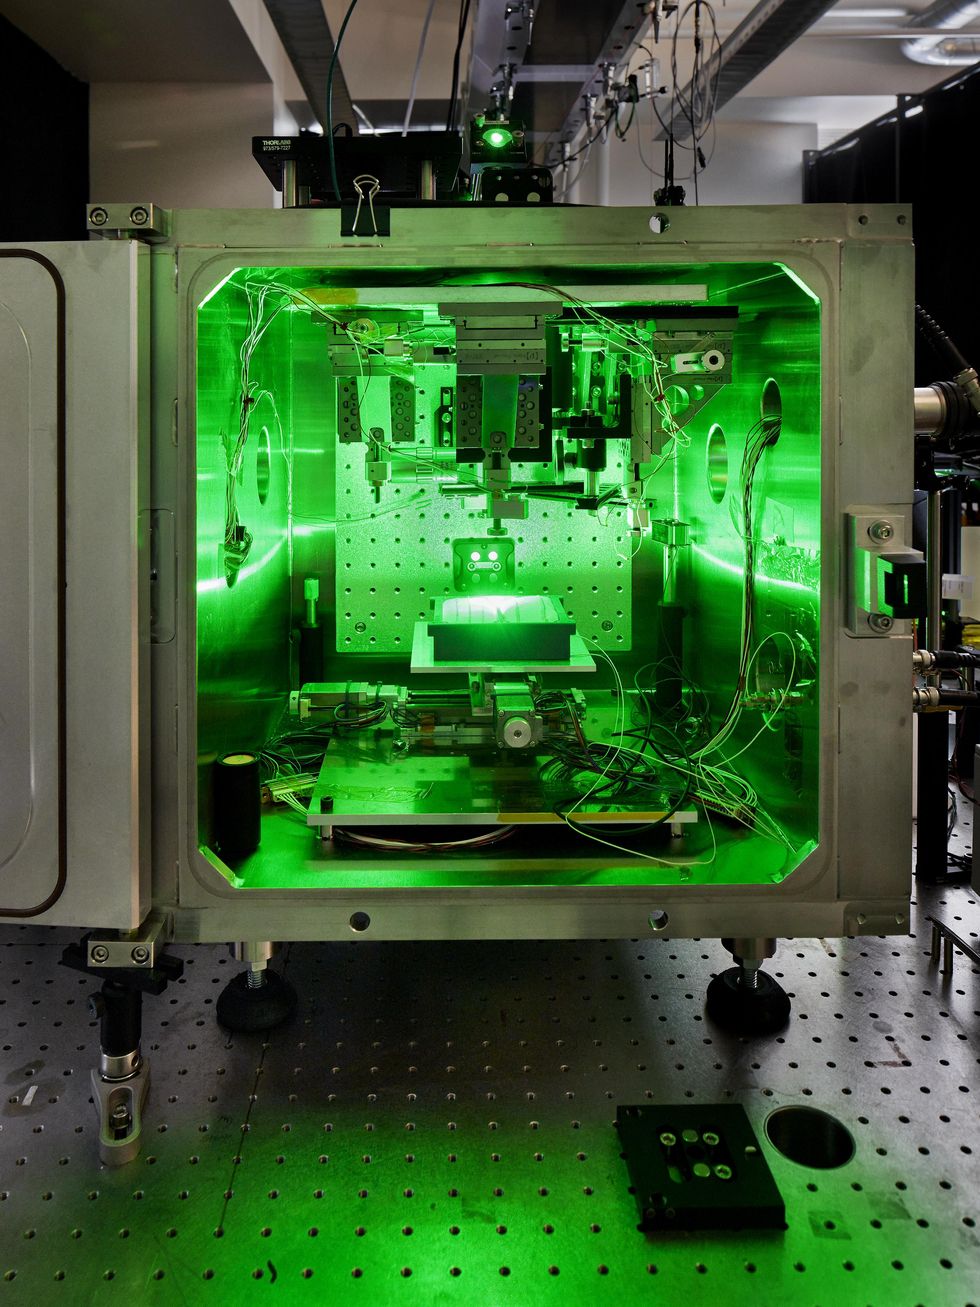 Laser equipment accelerating particles to supersonic speed in a facility.